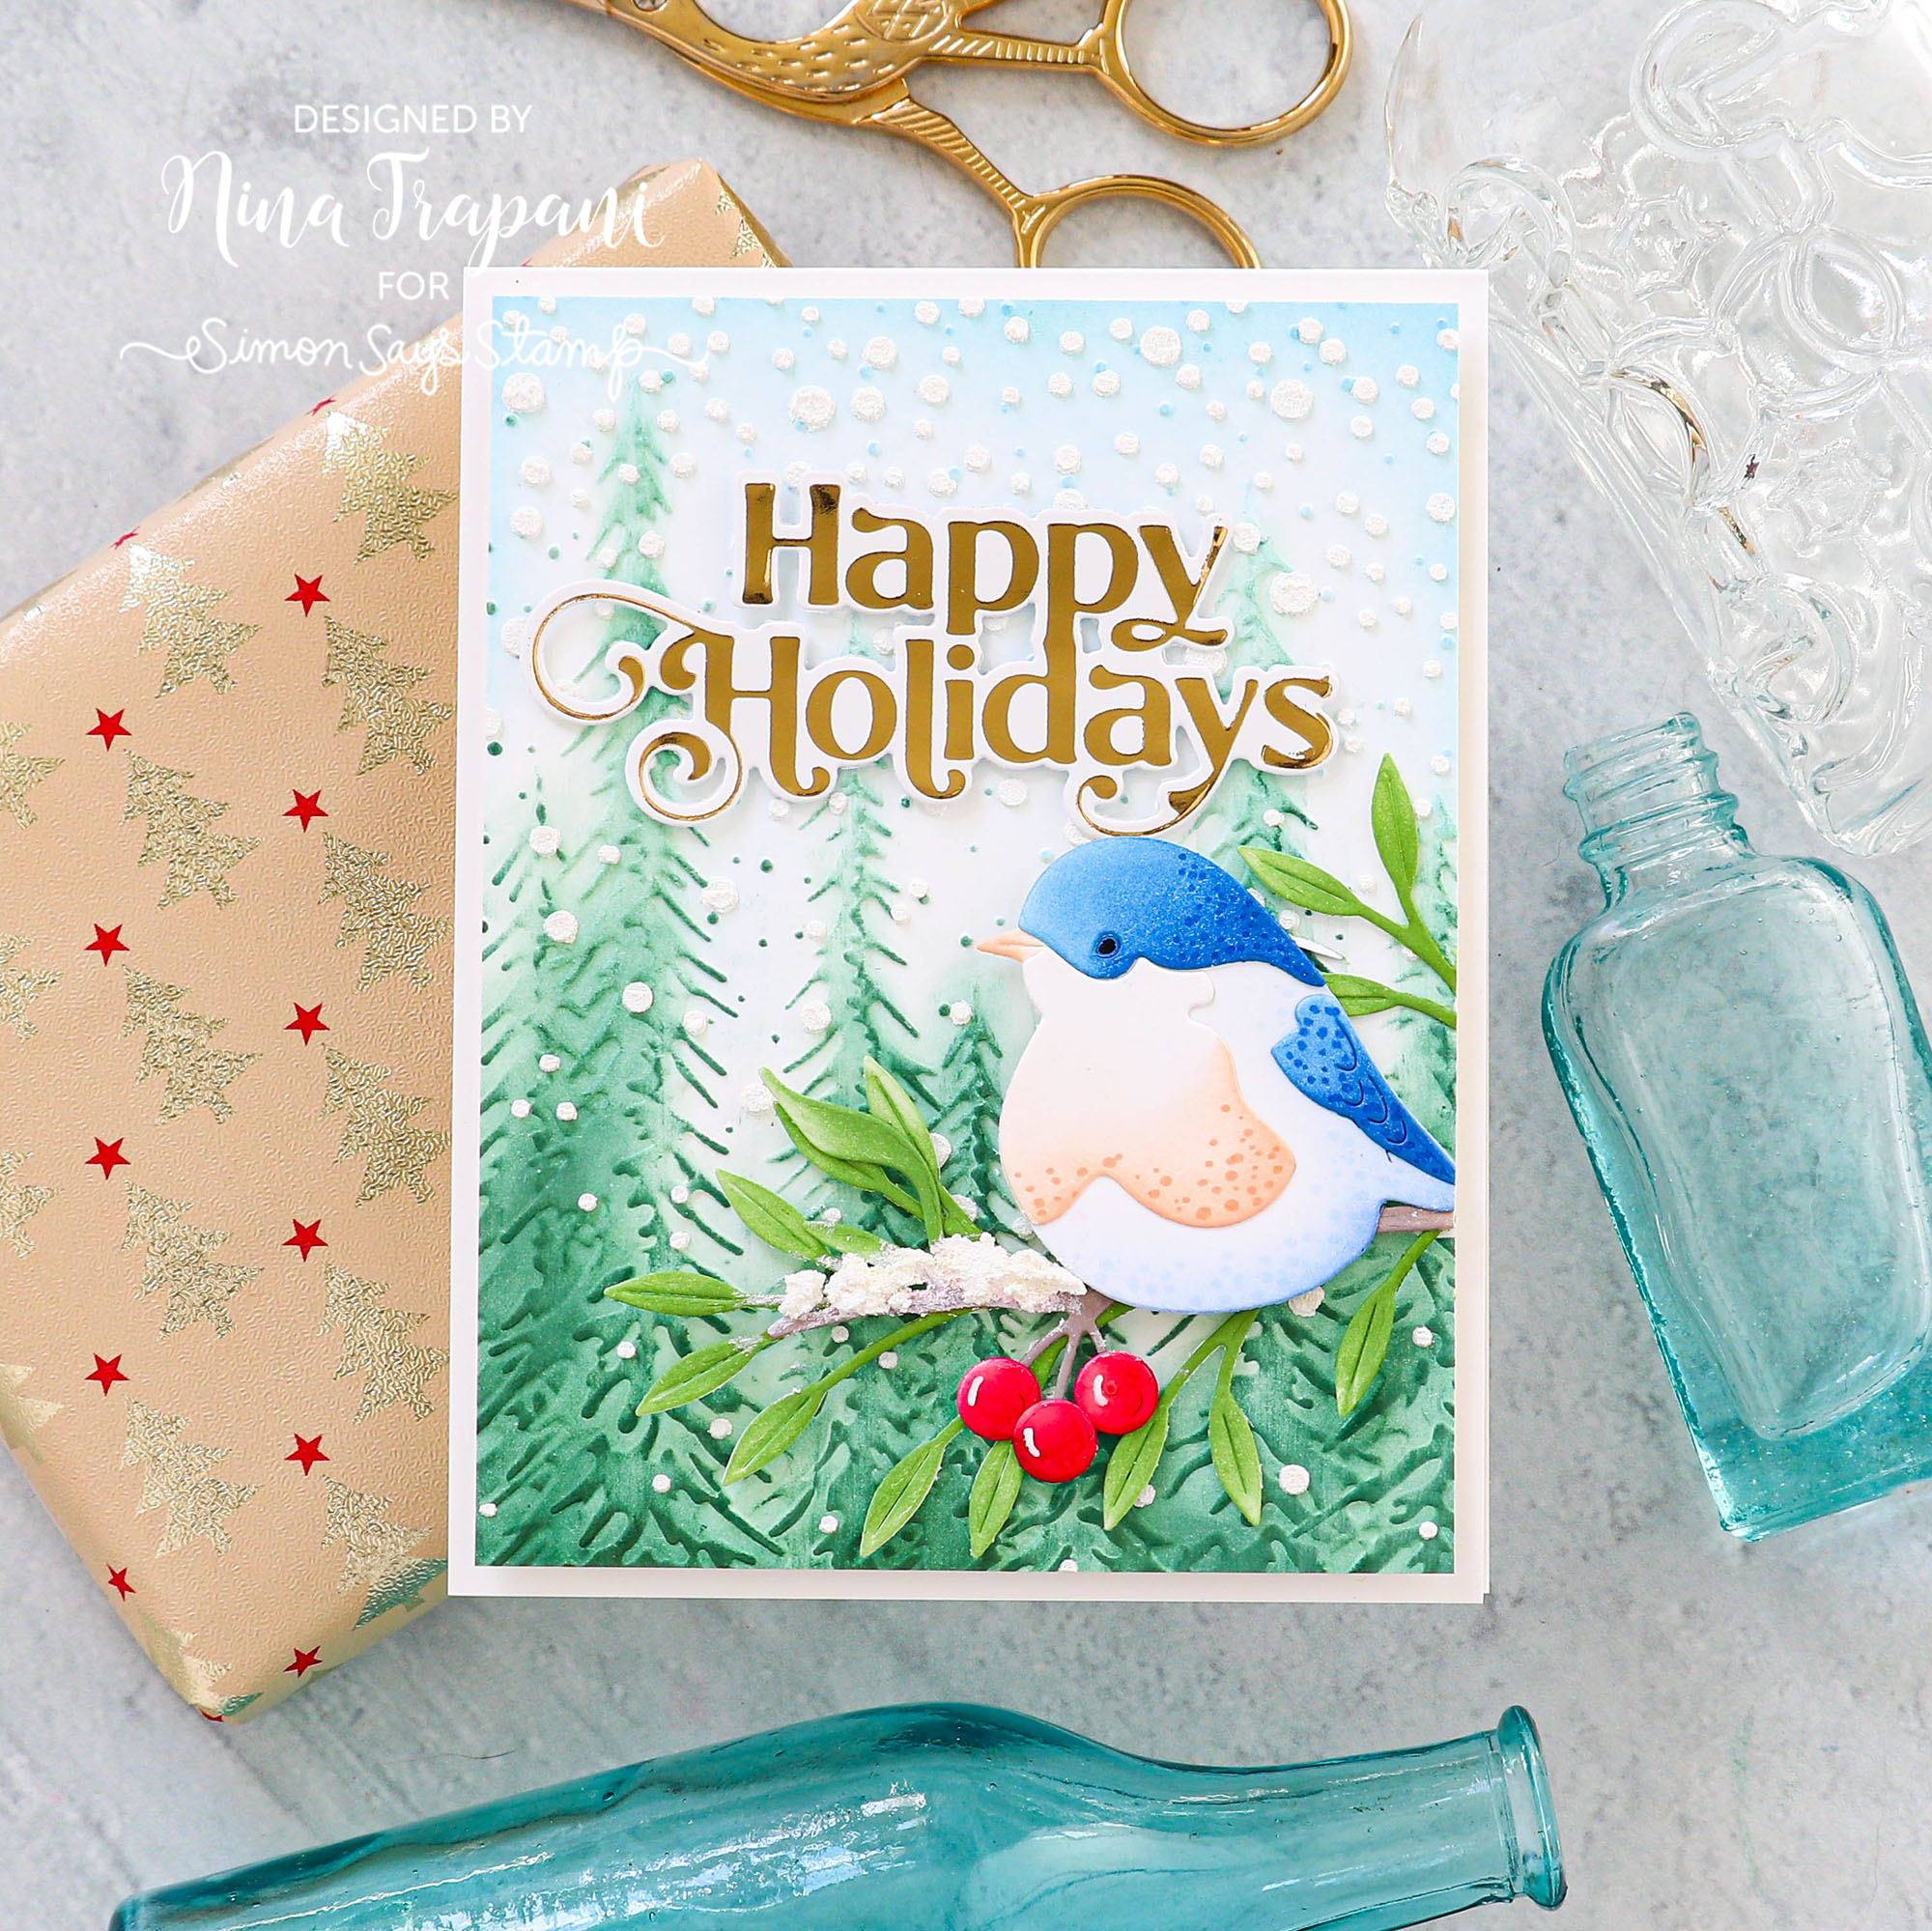 Have you played with Embossing Folders? - Lynn Como